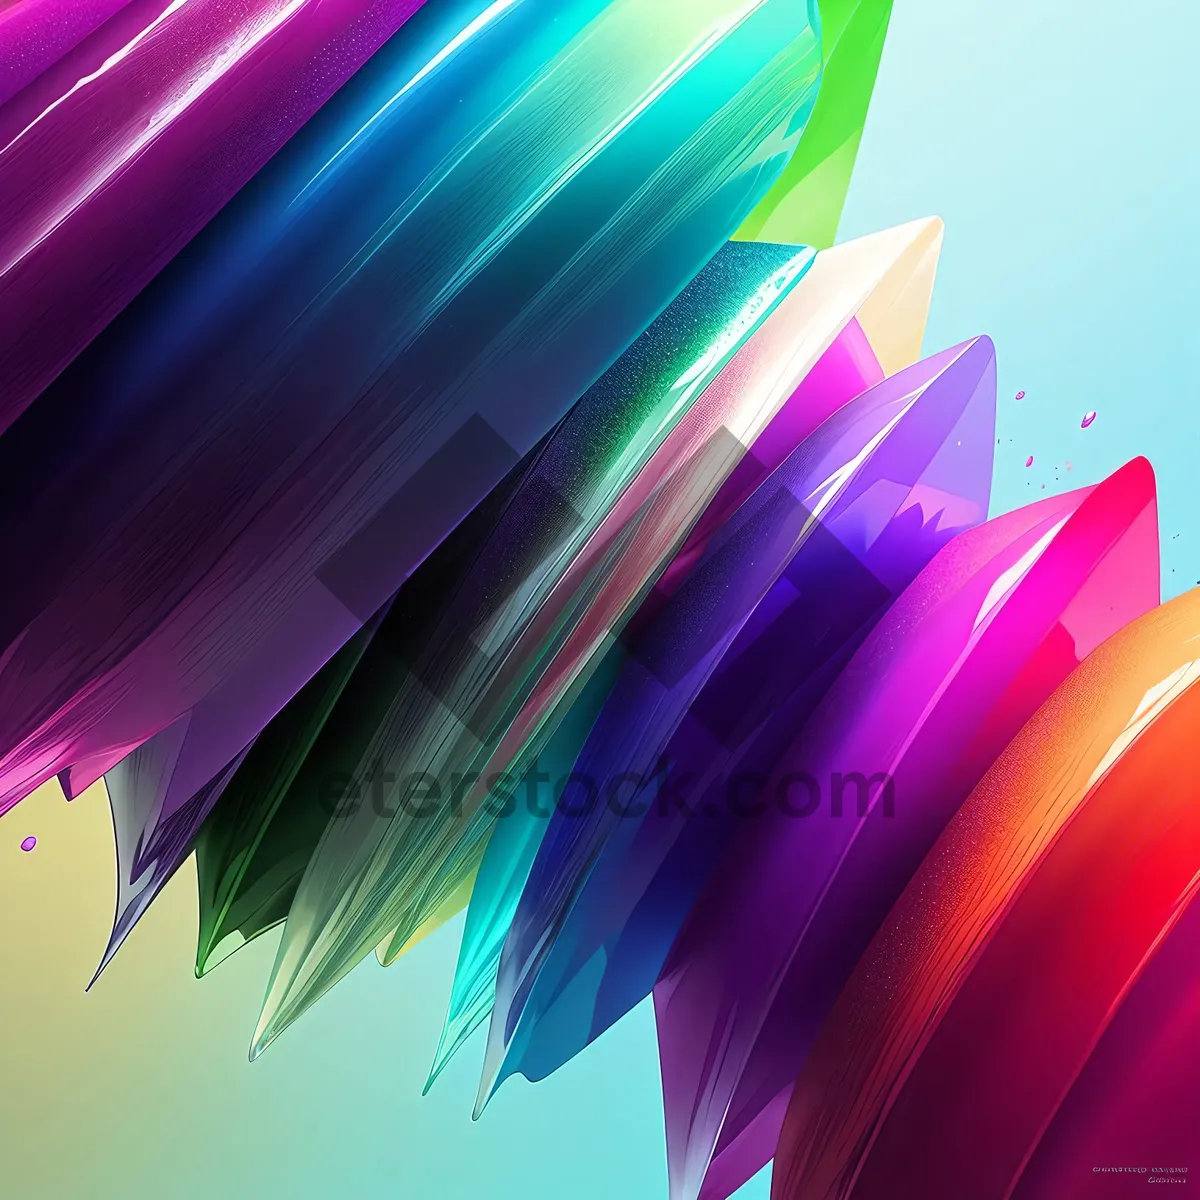 Picture of Energetic Sci-Fi Fractal Lightning: Futuristic Motion in Colorful Chaos